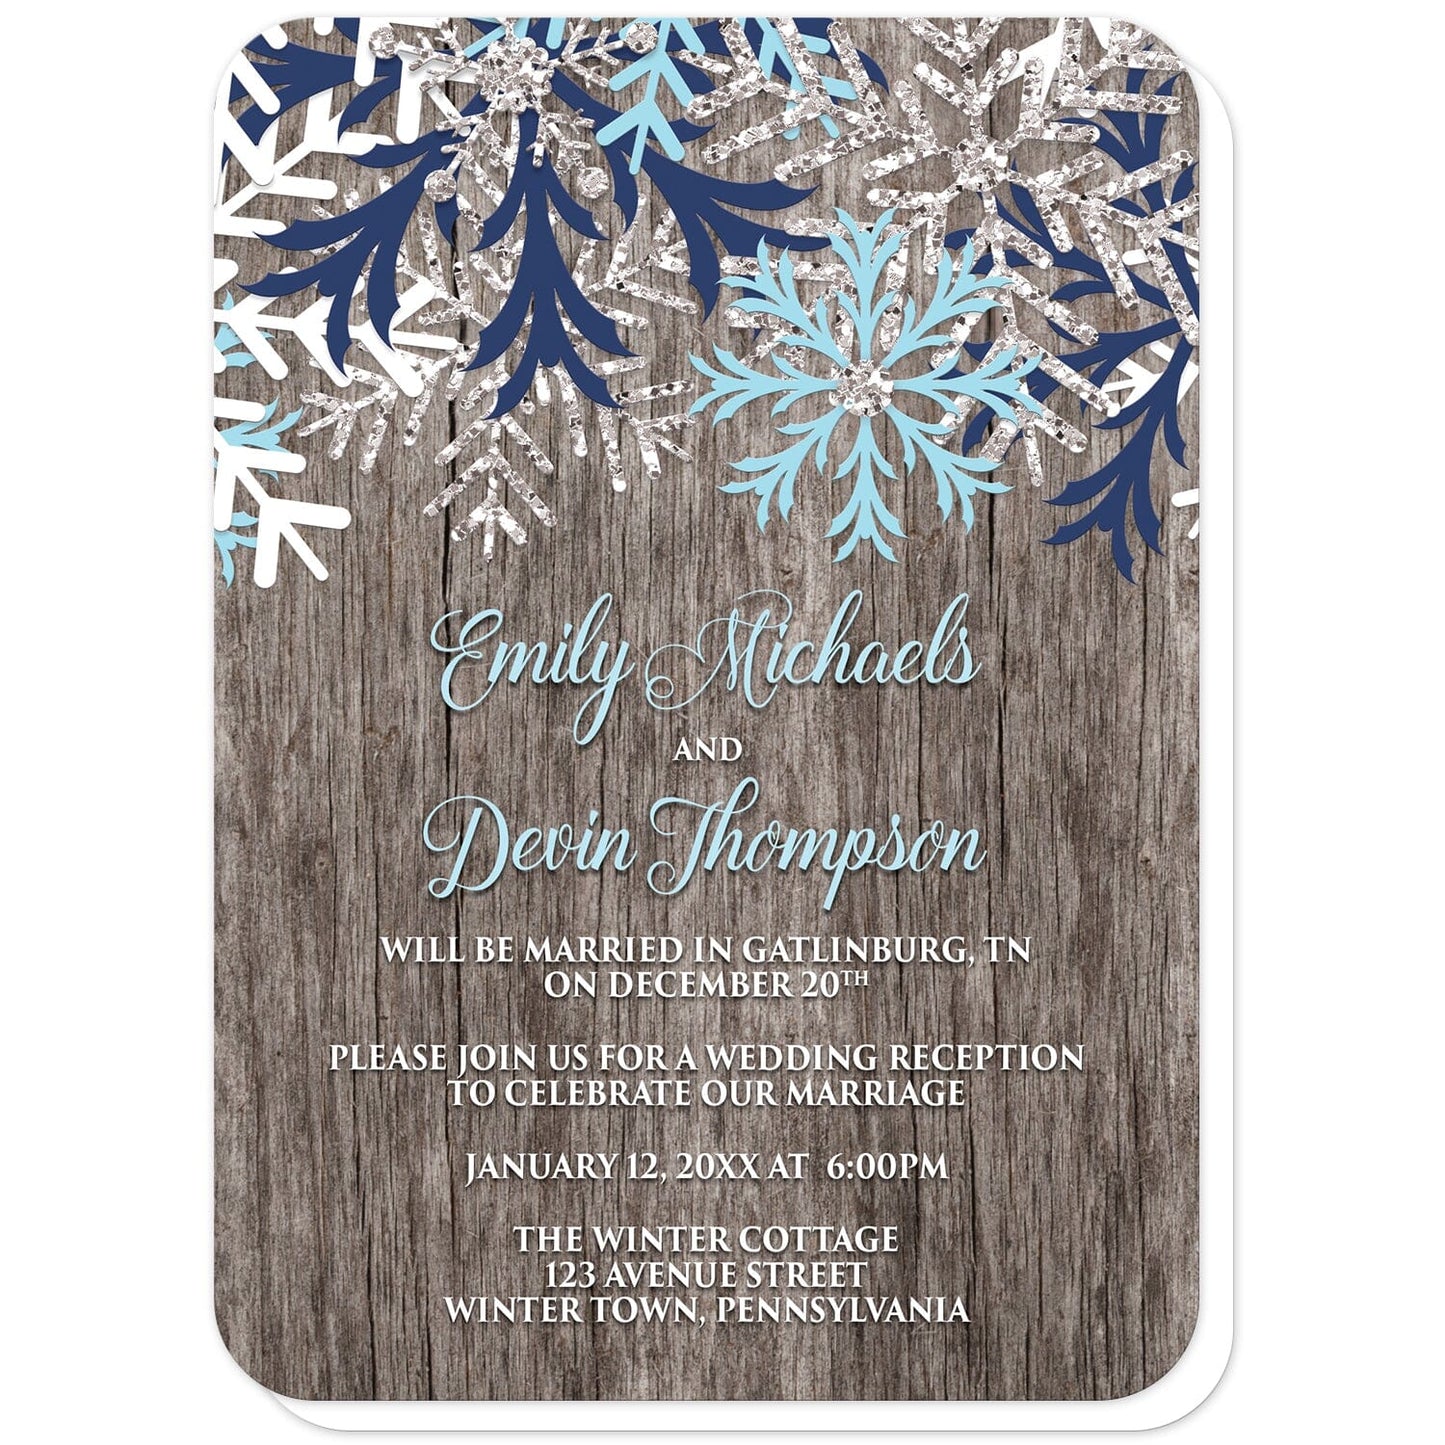 Rustic Winter Wood Navy Aqua Snowflake Reception Only Invitations (with rounded corners) at Artistically Invited. Country-inspired rustic winter wood navy aqua snowflake reception only invitations designed with light aqua blue, navy blue, white, and silver-colored glitter-illustrated snowflakes along the top over a rustic wood pattern illustration. Your personalized post-wedding reception details are custom printed in aqua blue and white over the wood background below the snowflakes.